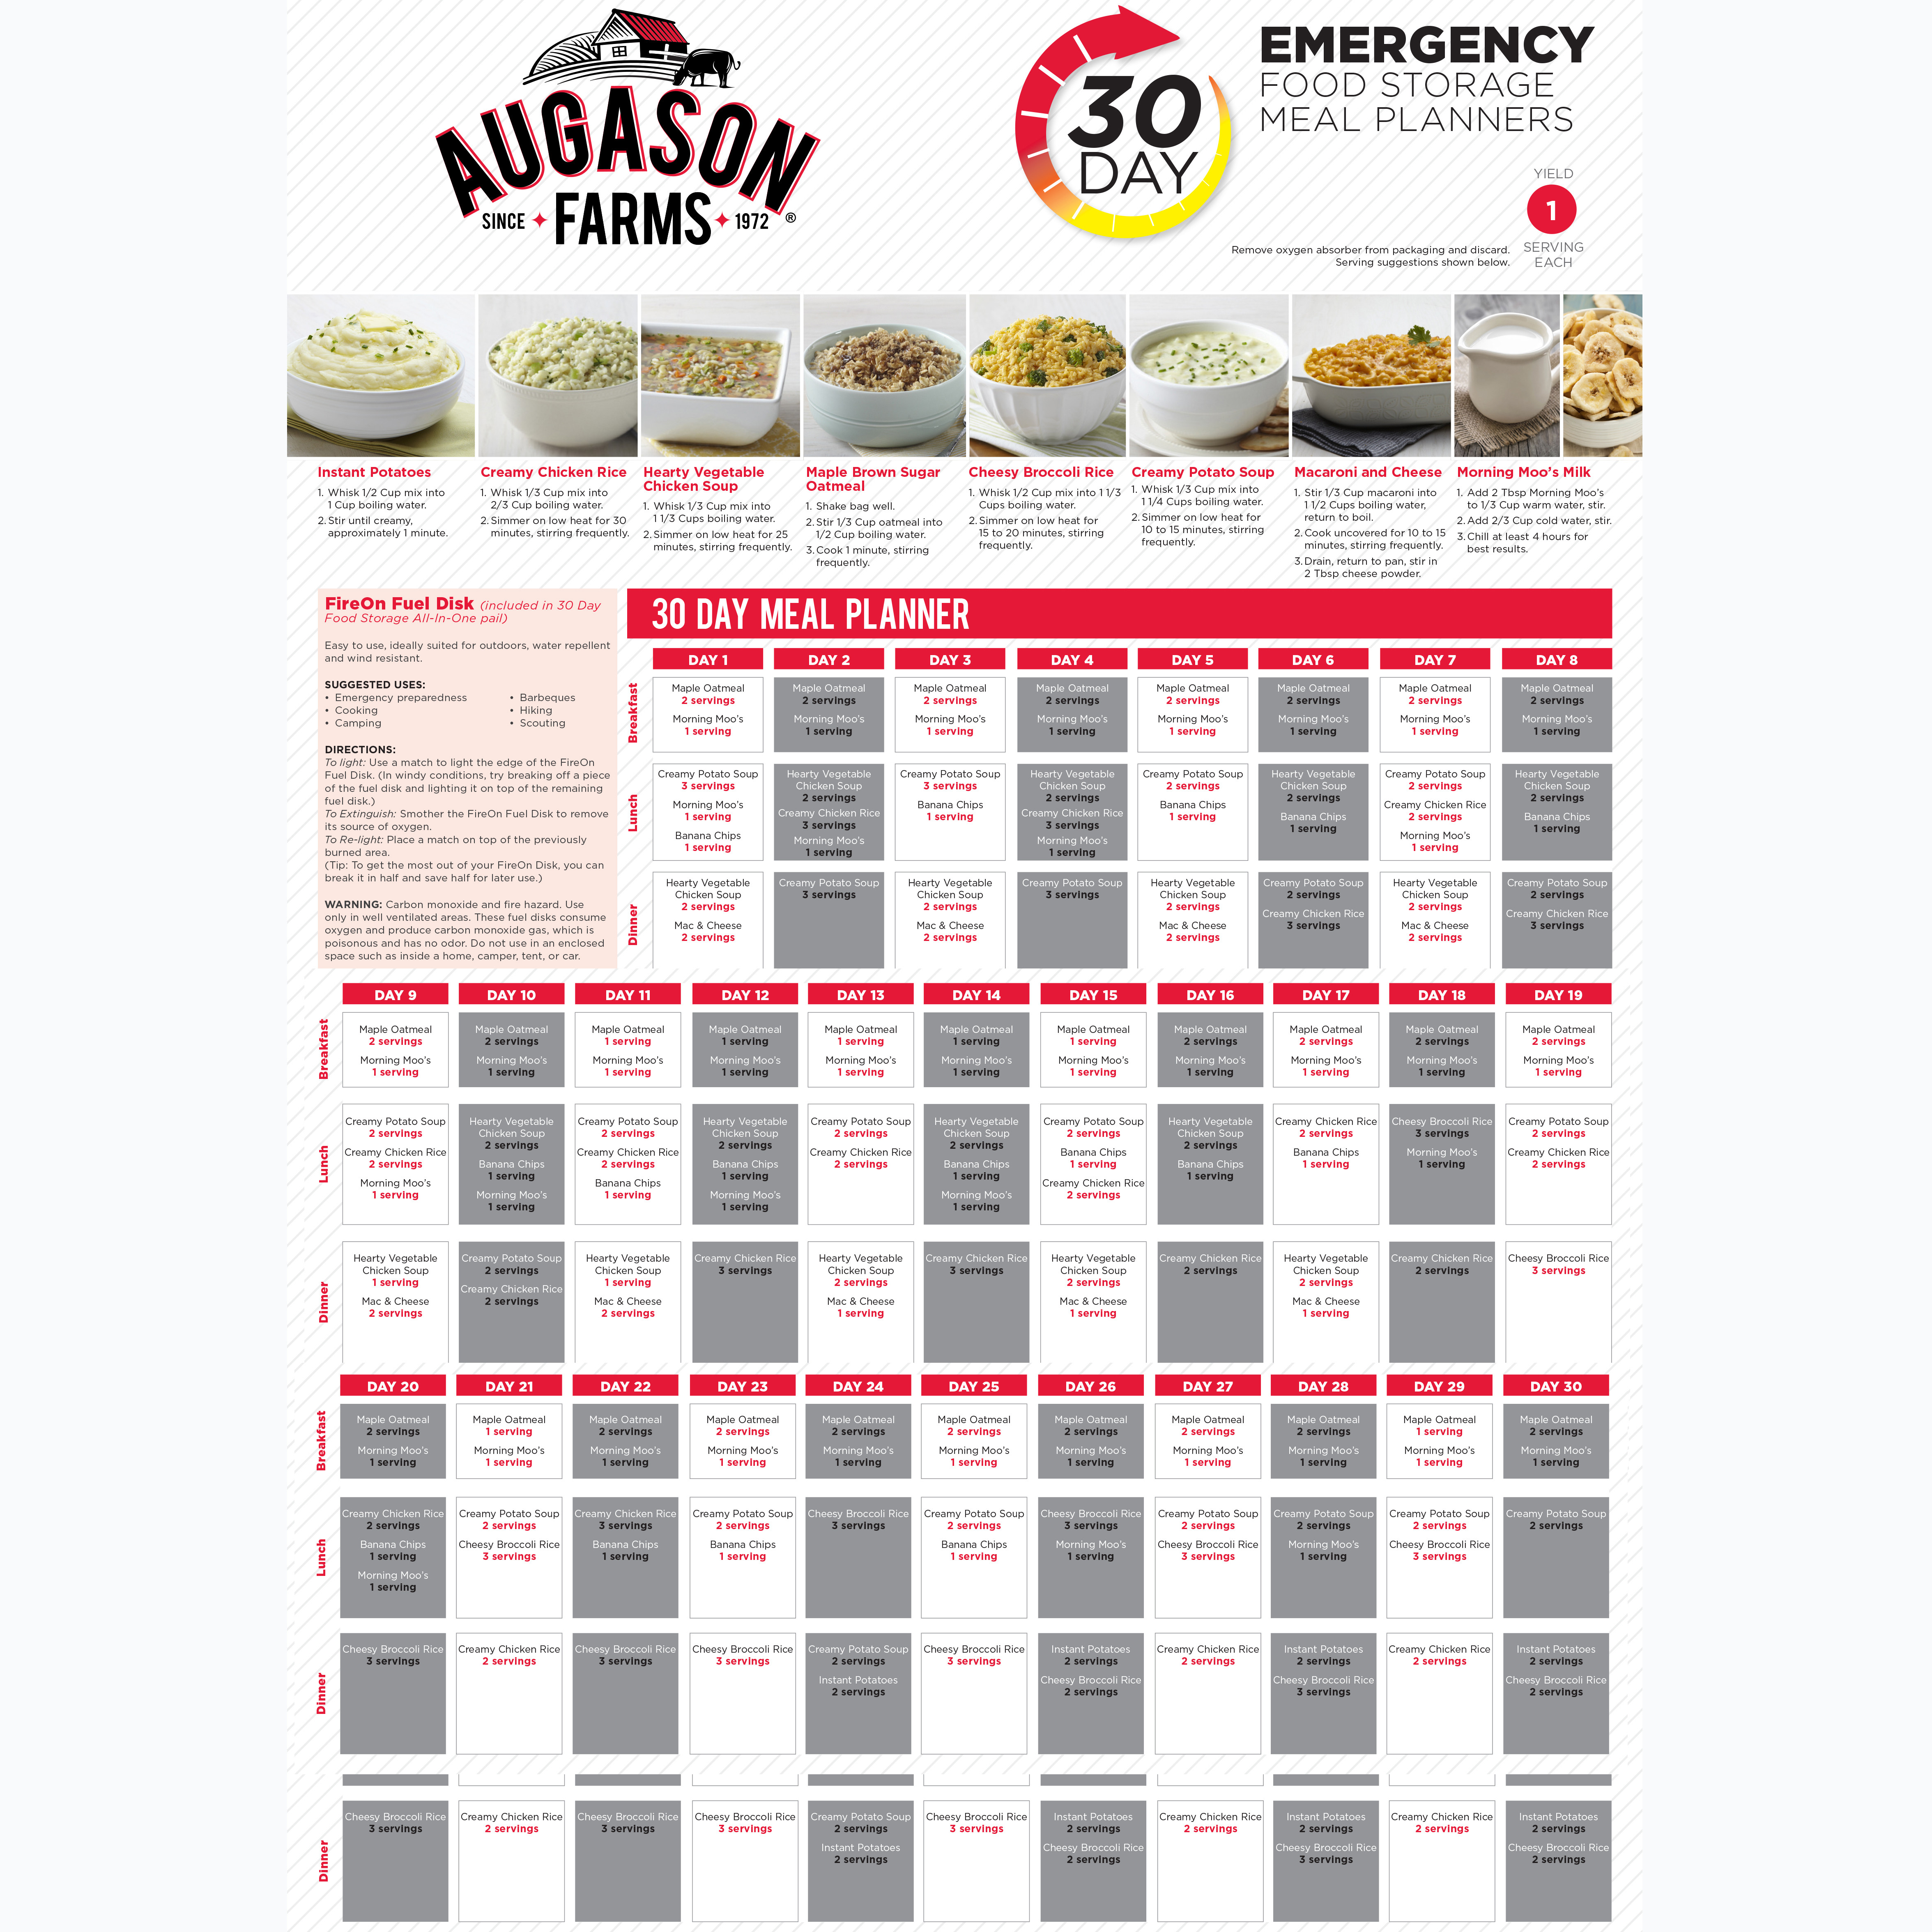 Augason Farms 1-Person 30-Day Emergency Food Supply - QSS-Certified - image 5 of 16